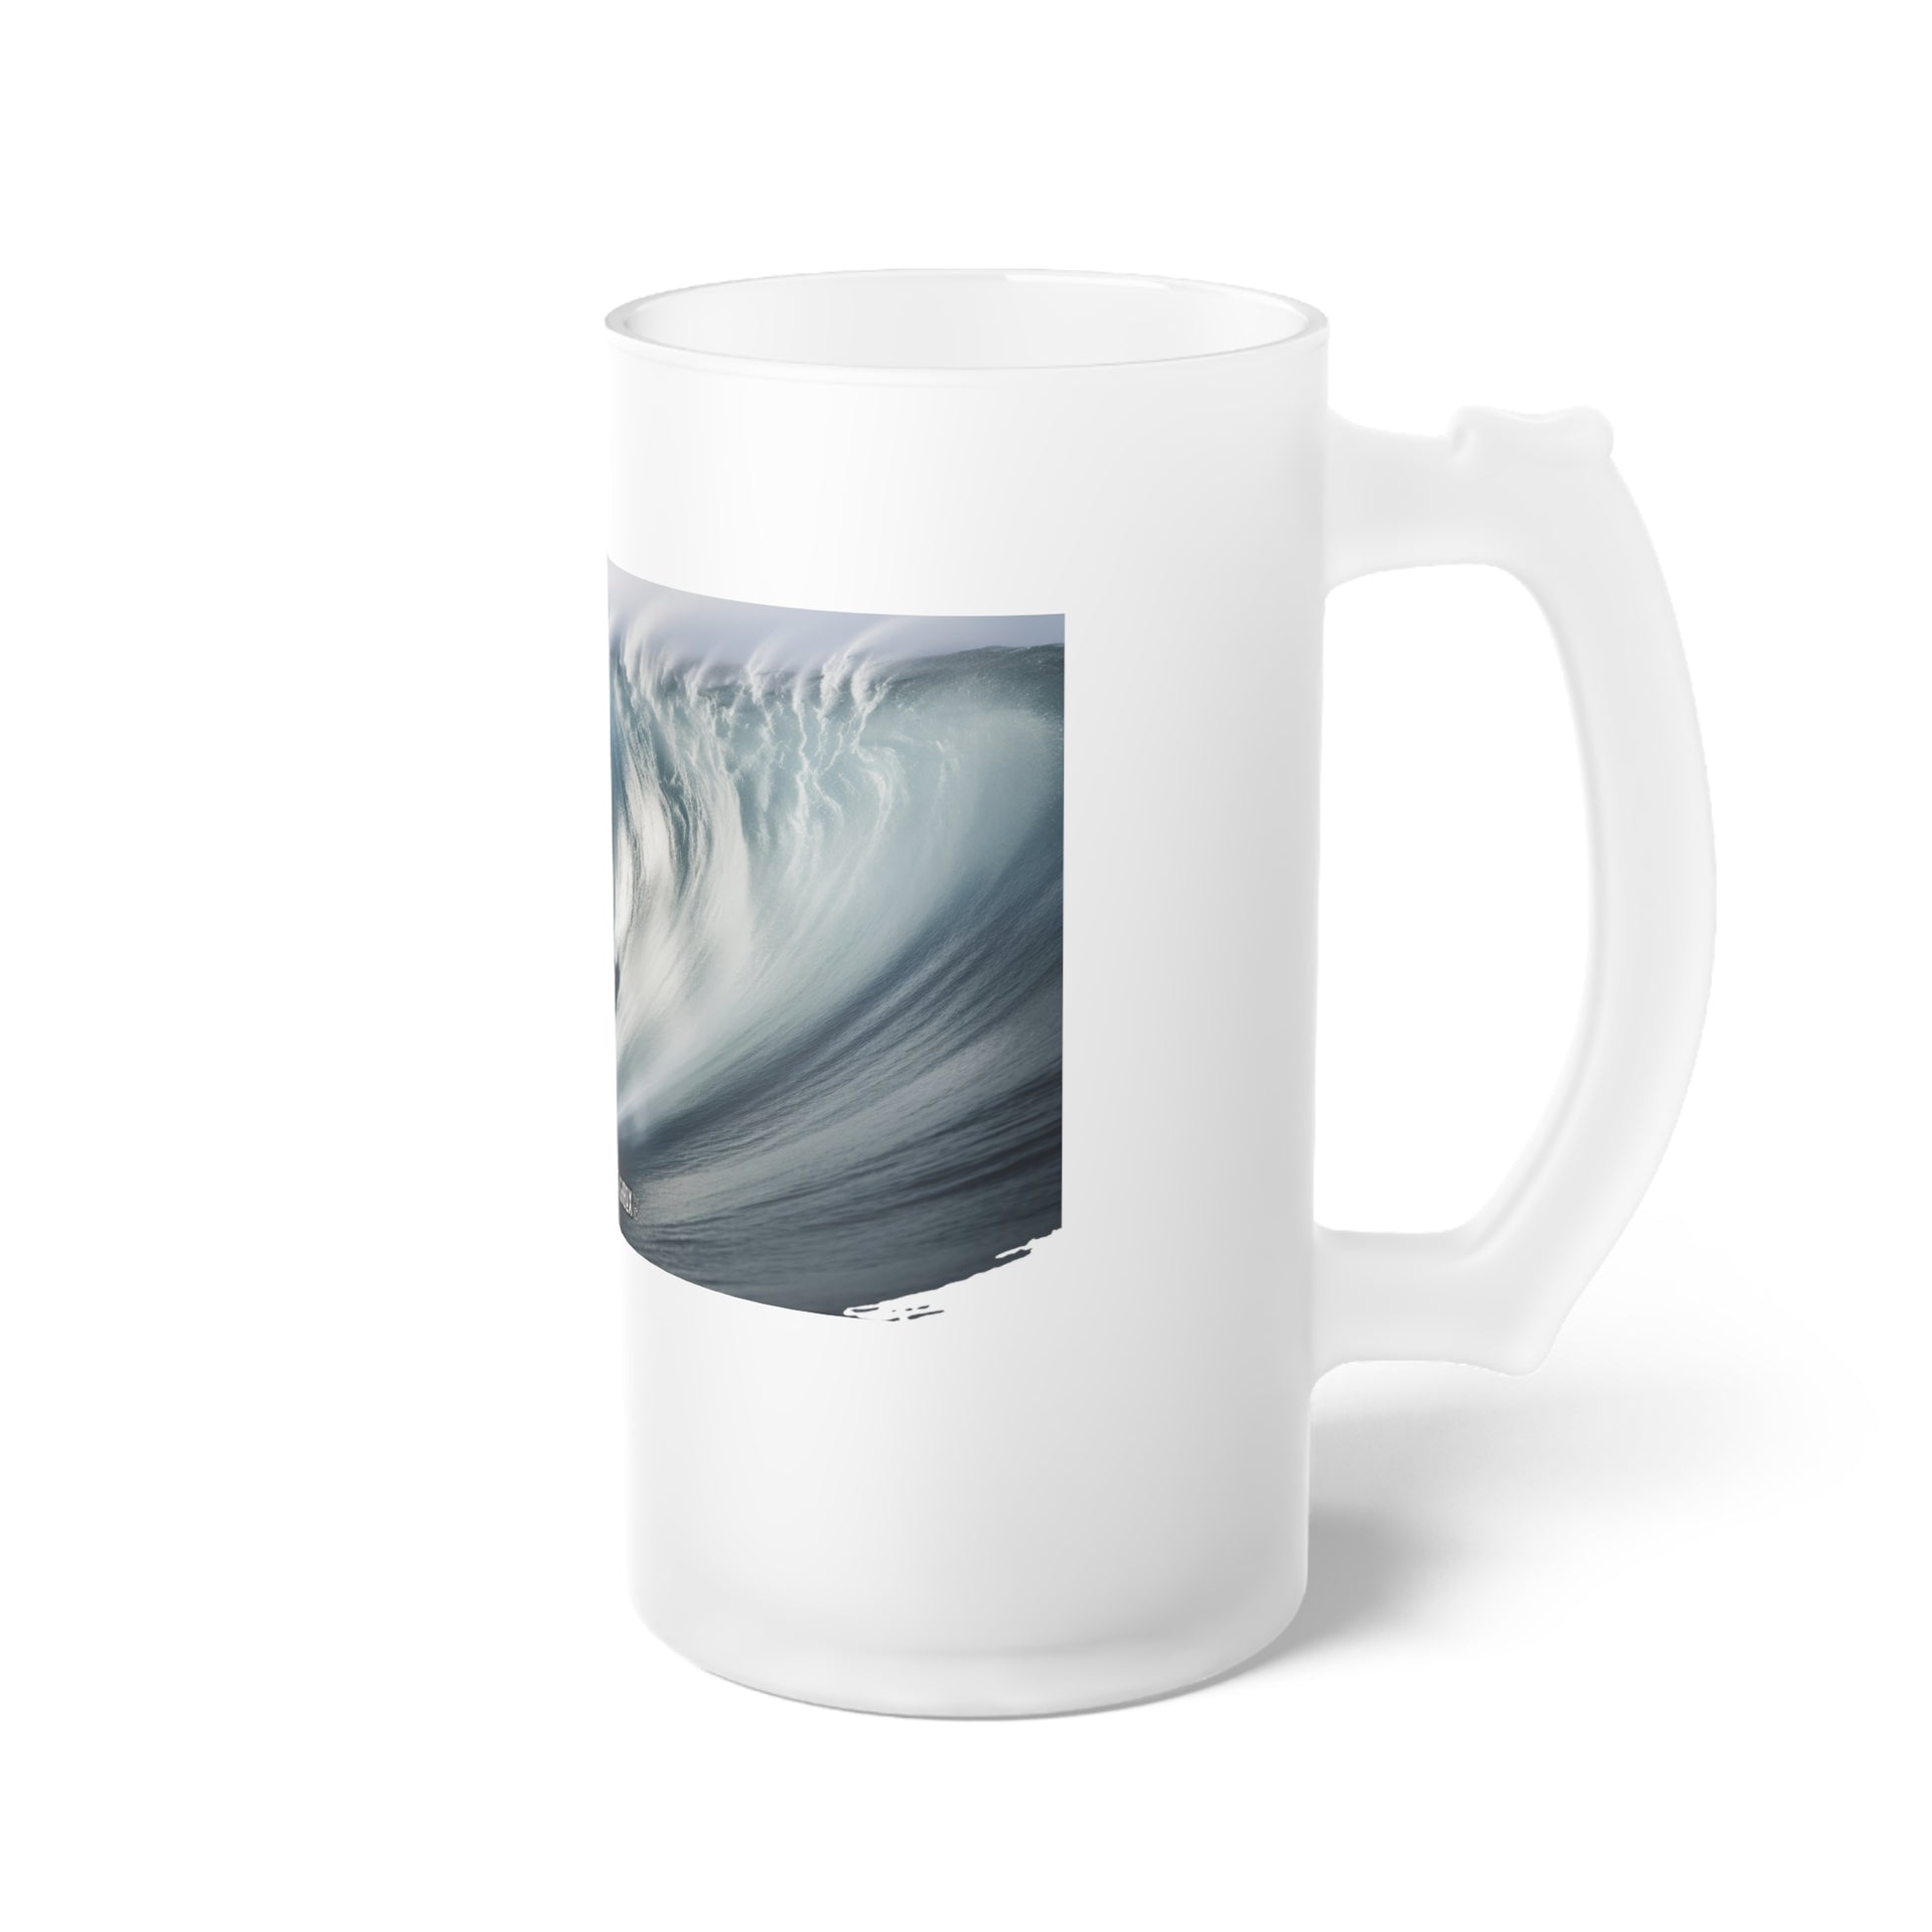 Embrace the Power: Surfer Charging a 61-Foot Giant Wave Frosted Beer Mug - Waves Design #061. Feel the thrill as you sip your favorite brew, celebrating the surfer's bravery in the face of nature's might. 🏄‍♂️🍺 #SurferCourage #GiantWaveMug #StashboxGlassware